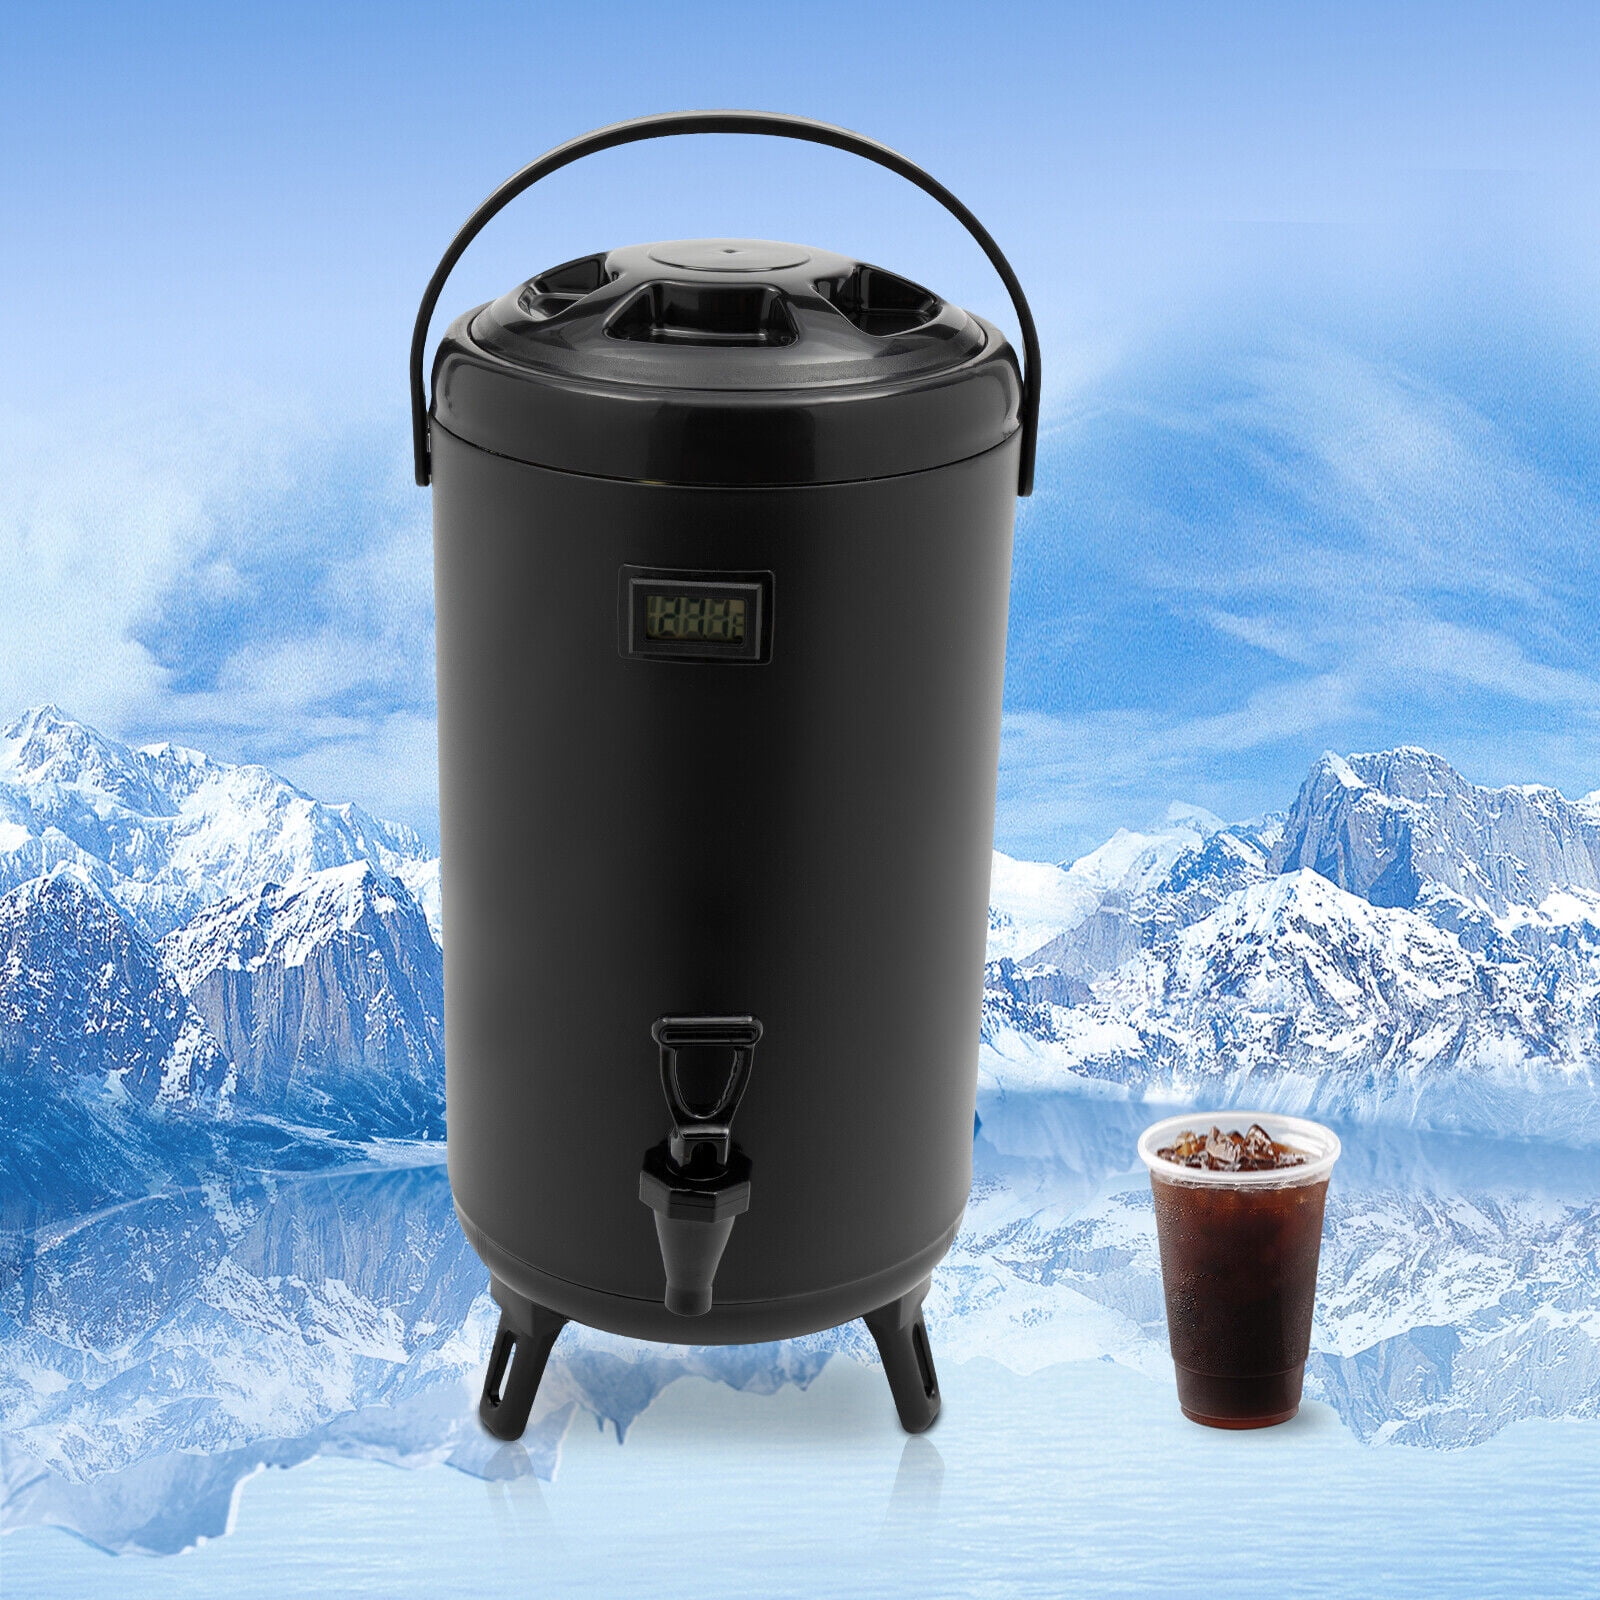 Insulated Beverage Dispenser 12 QT/3.2 Gallon, Stainless Steel Beverage  Dispenser Cold and Hot Drink dispenser with Thermometer-Spigot for Hot Tea  